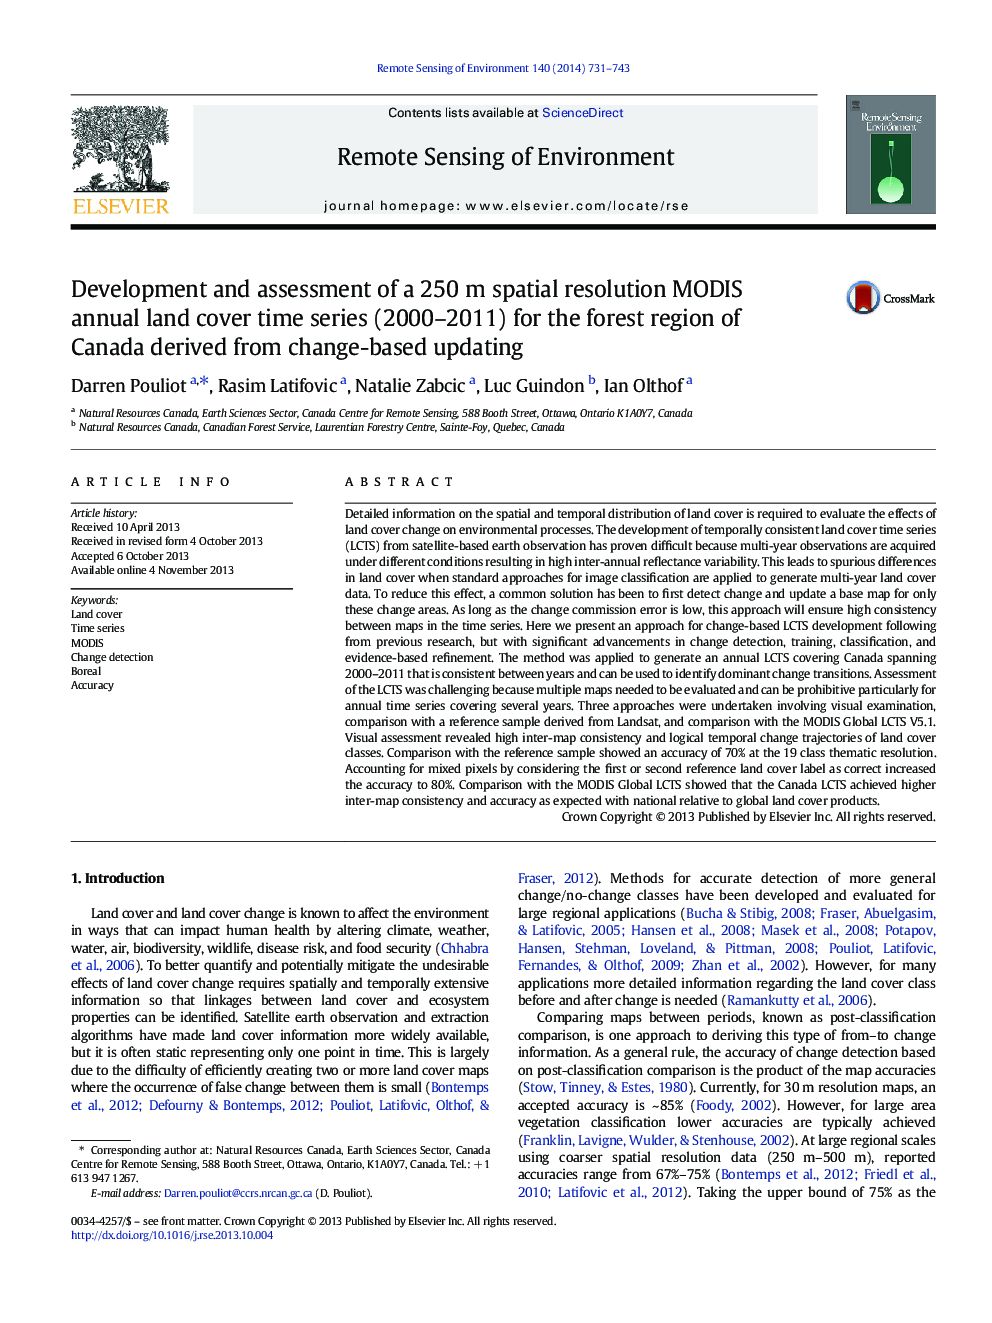 Development and assessment of a 250Â m spatial resolution MODIS annual land cover time series (2000-2011) for the forest region of Canada derived from change-based updating